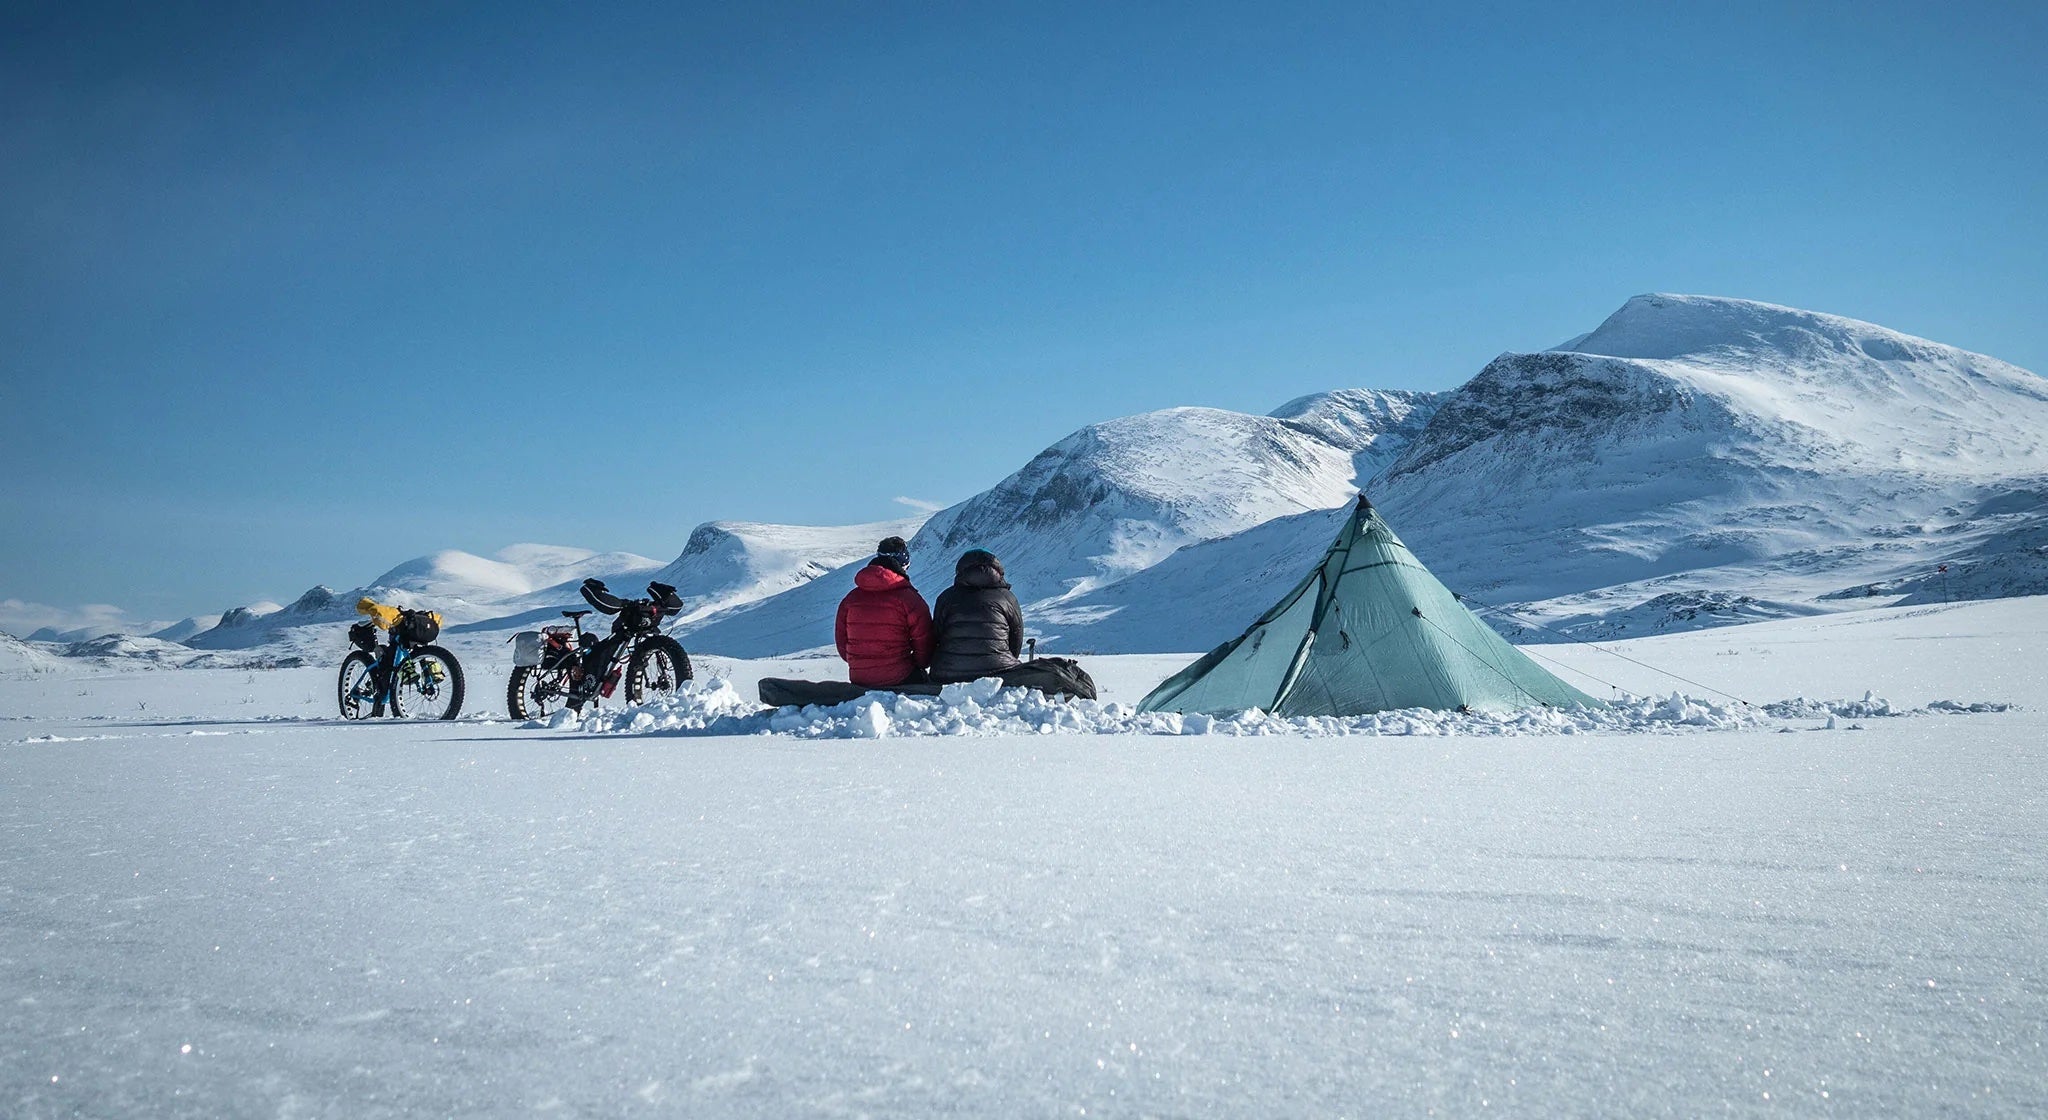 Three people sitting beside a tent on a snowy landscape with bicycles nearby, with mountains in the background.